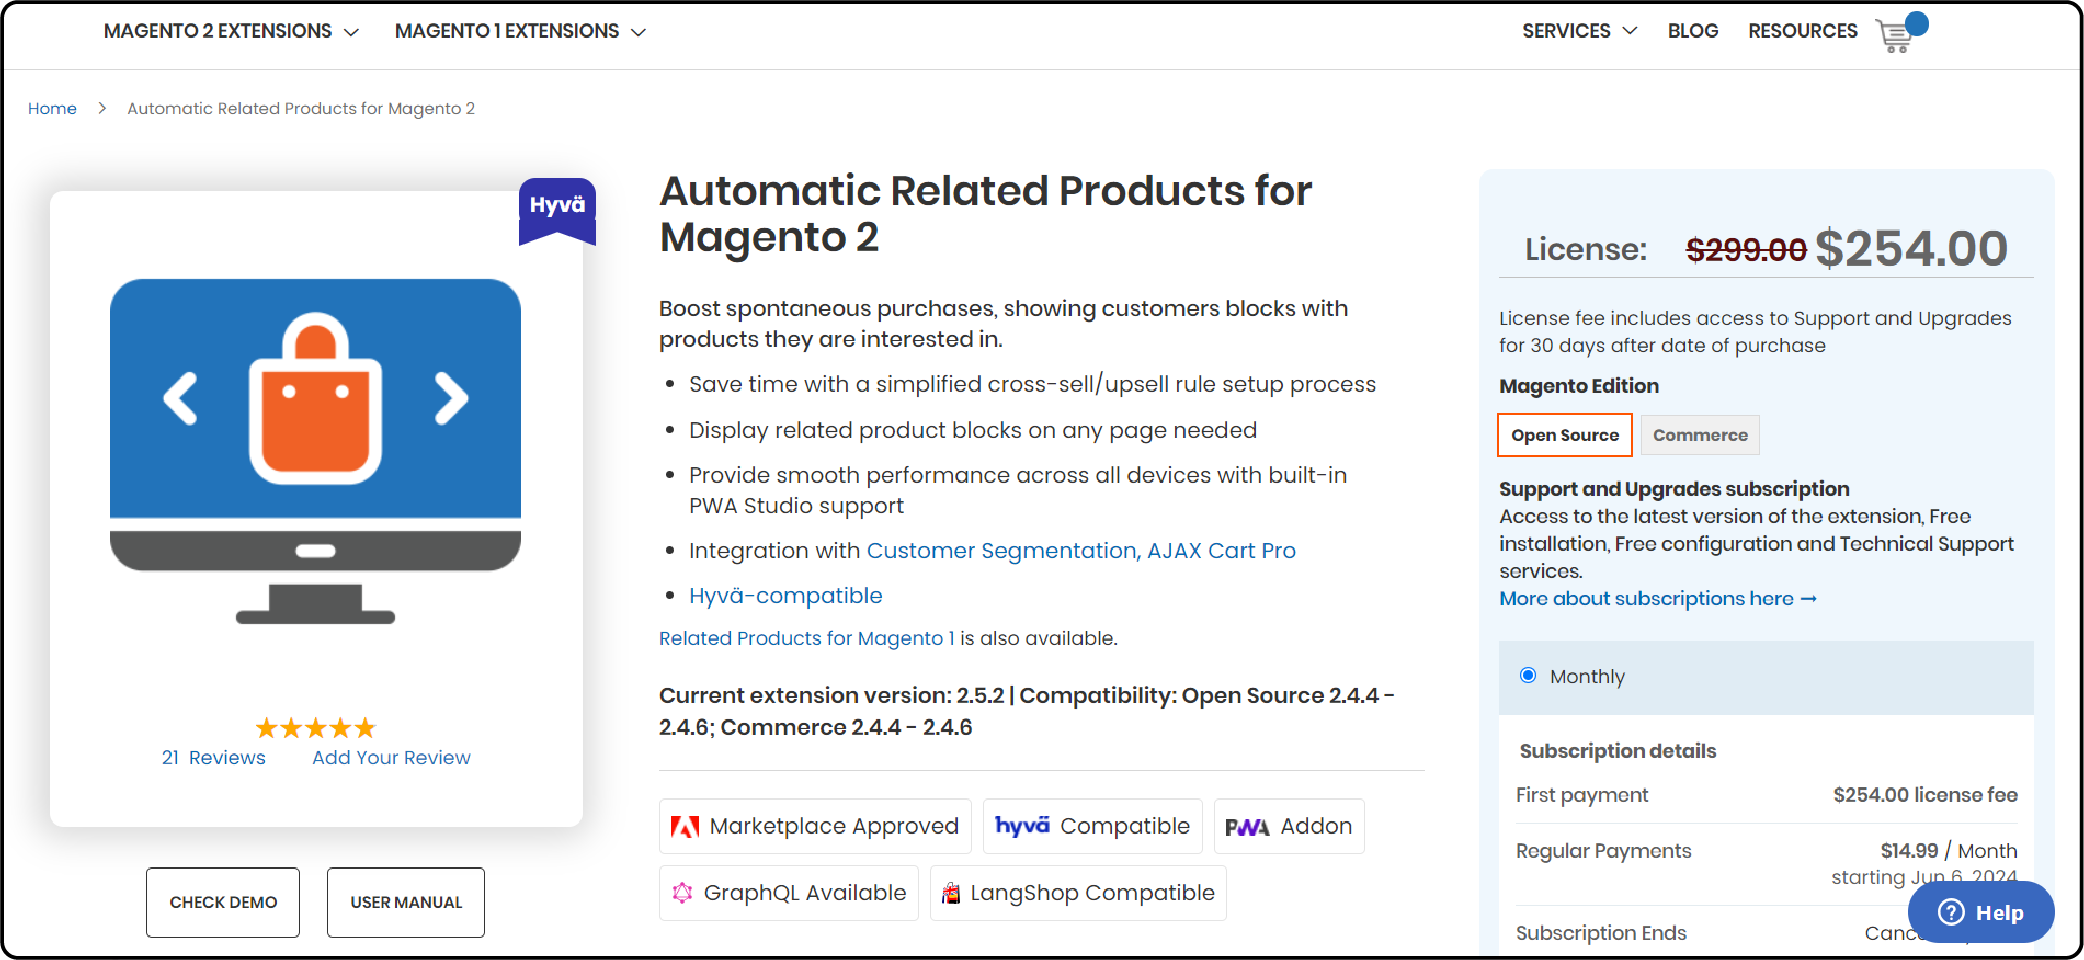 Best Magento 2 Dynamic Pricing Extensions - AheadWorks Automatic Related Products 2